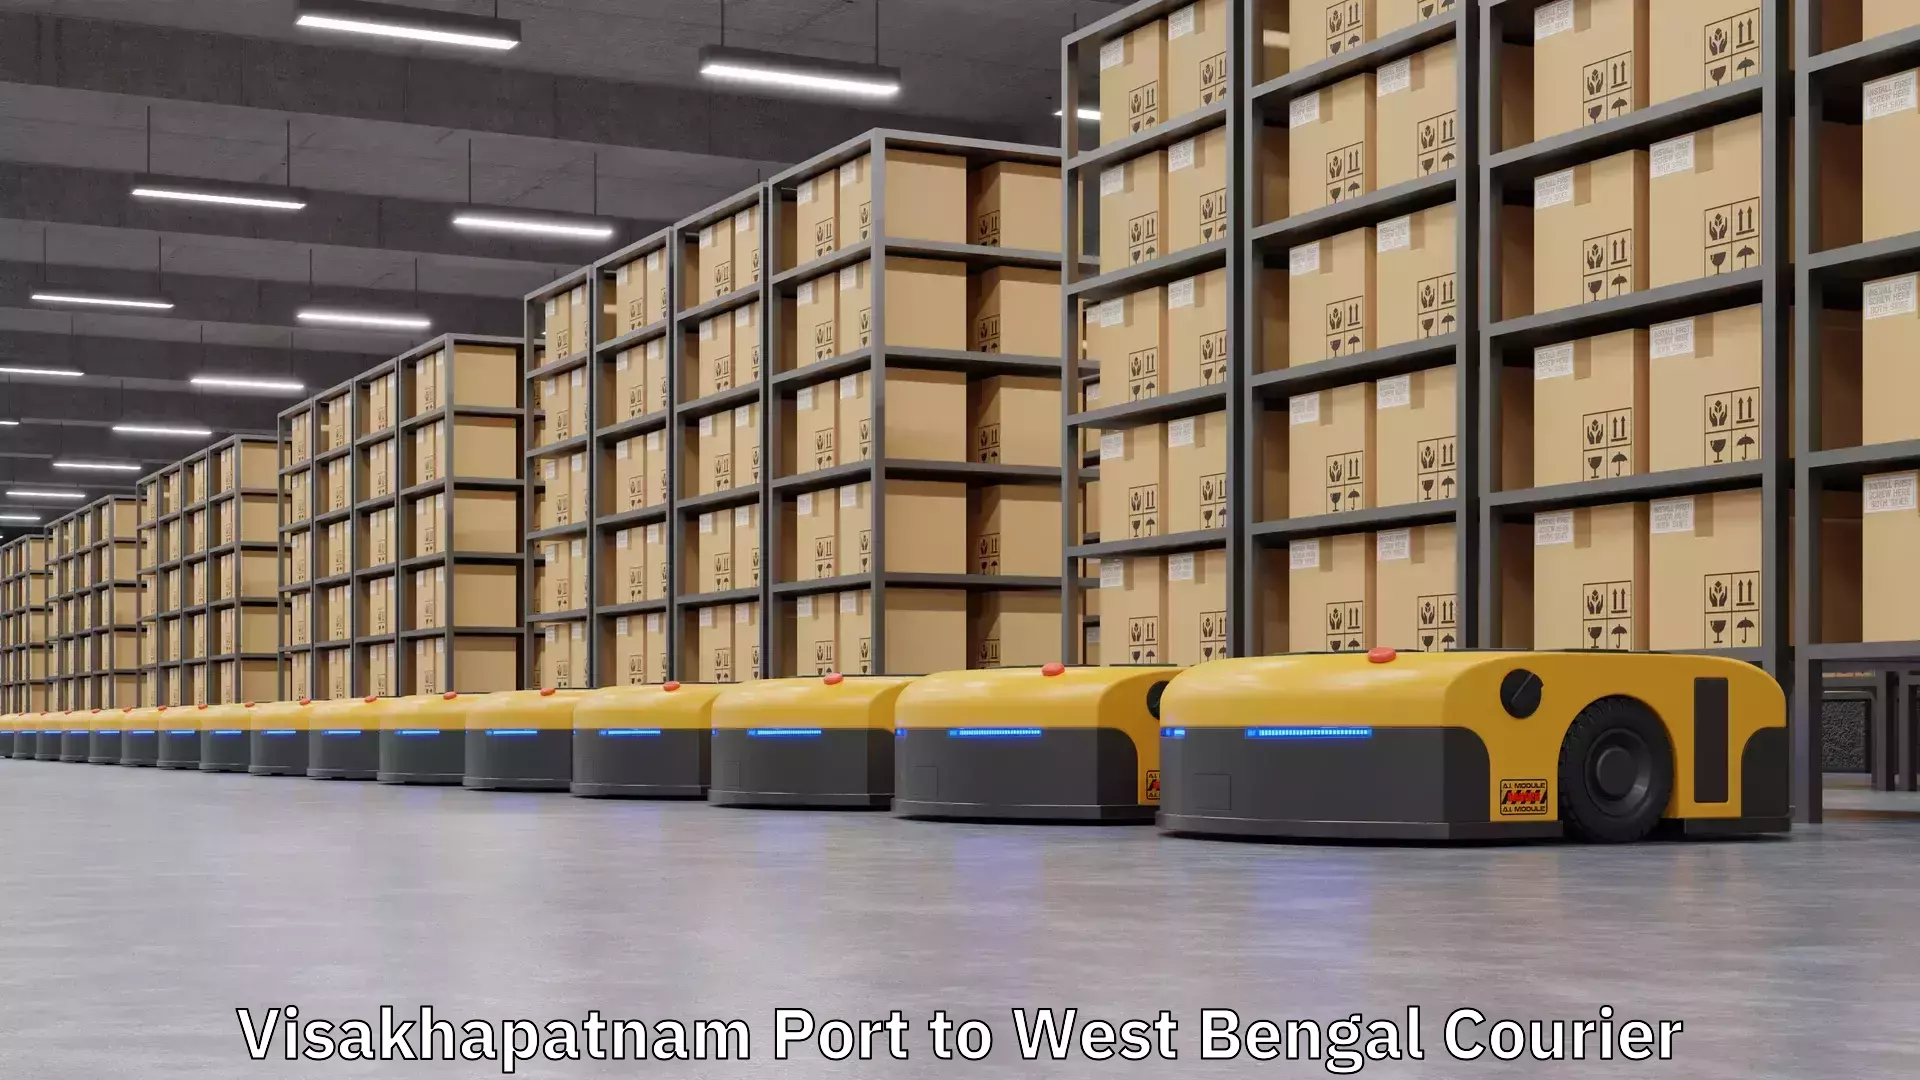 Express logistics service in Visakhapatnam Port to West Bengal